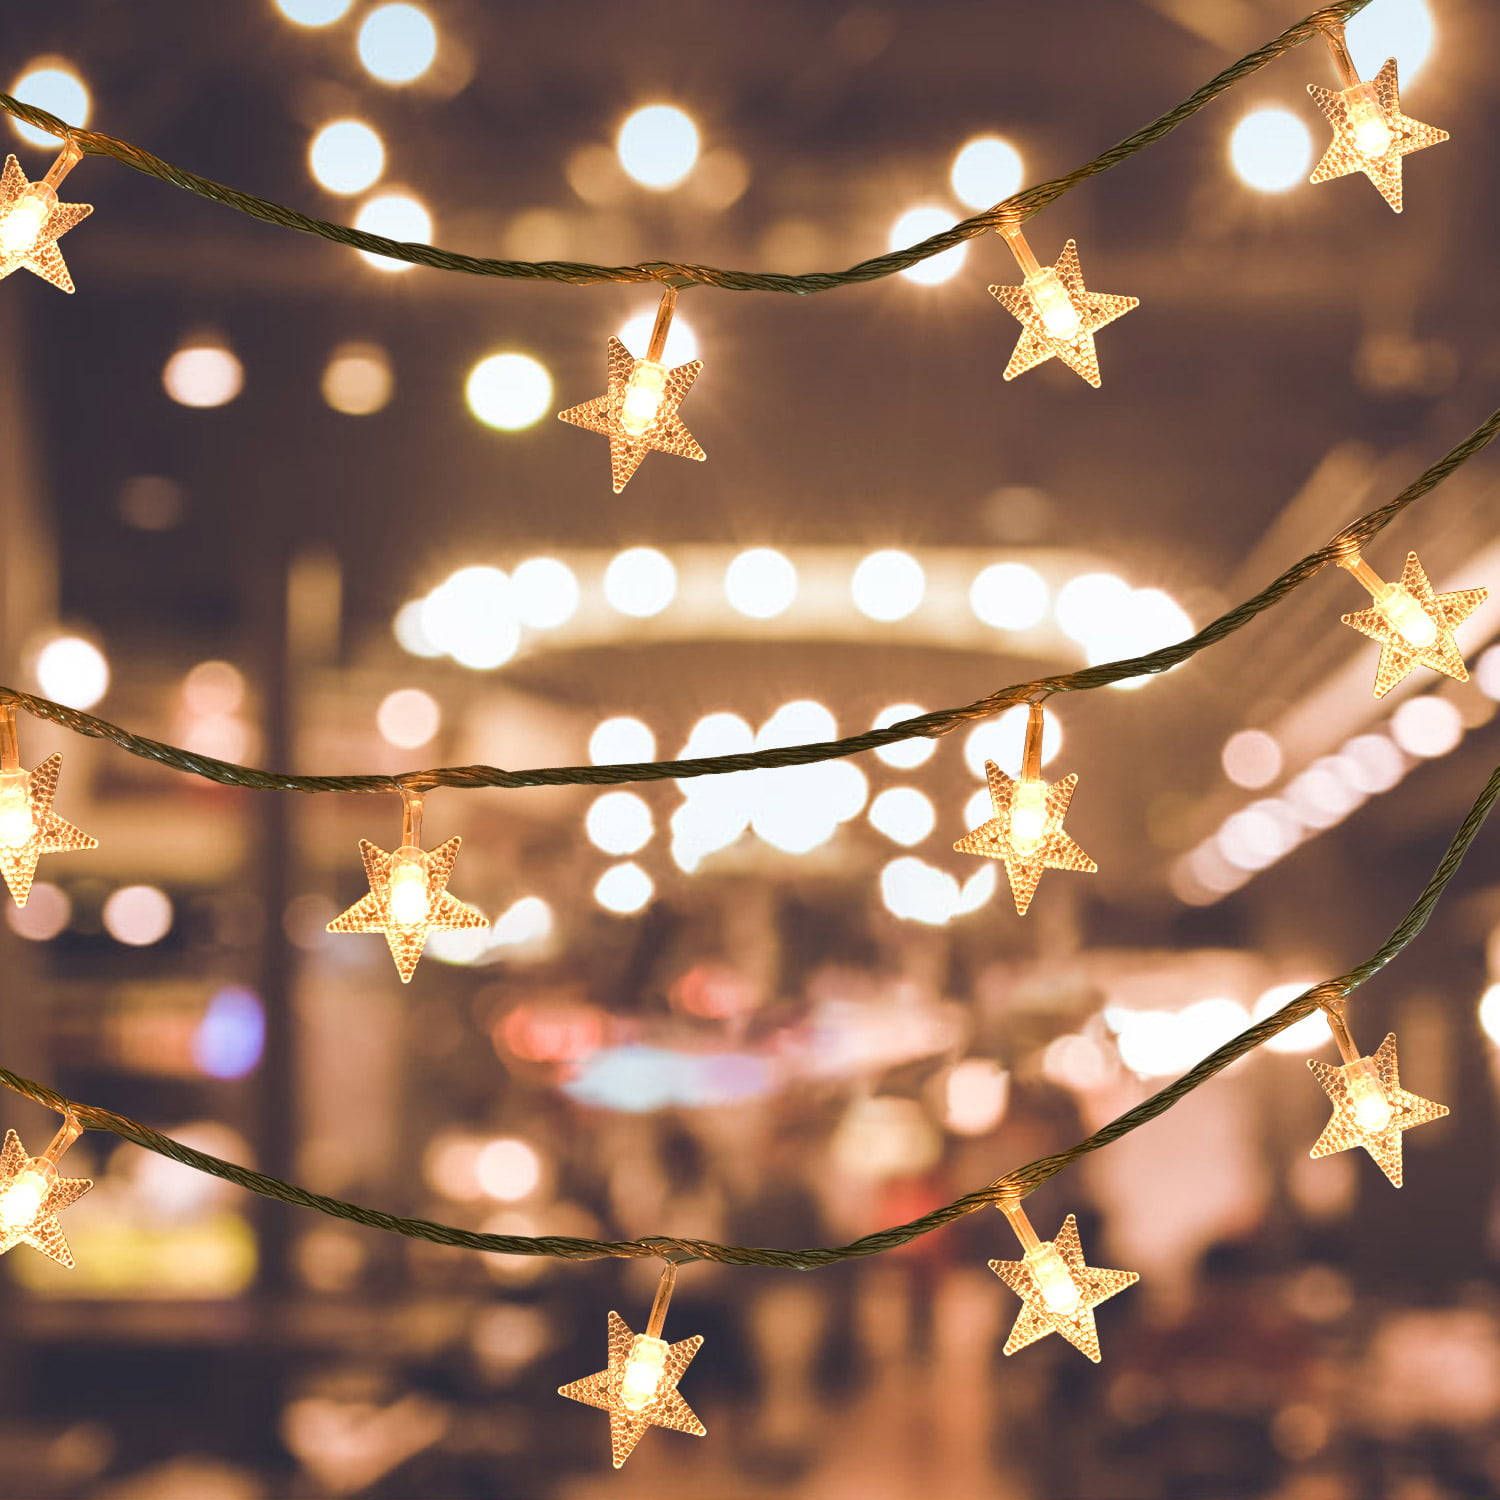 Download Enjoy the beauty of fairy lights twinkle away and create a dazzling elegant atmosphere Wallpaper